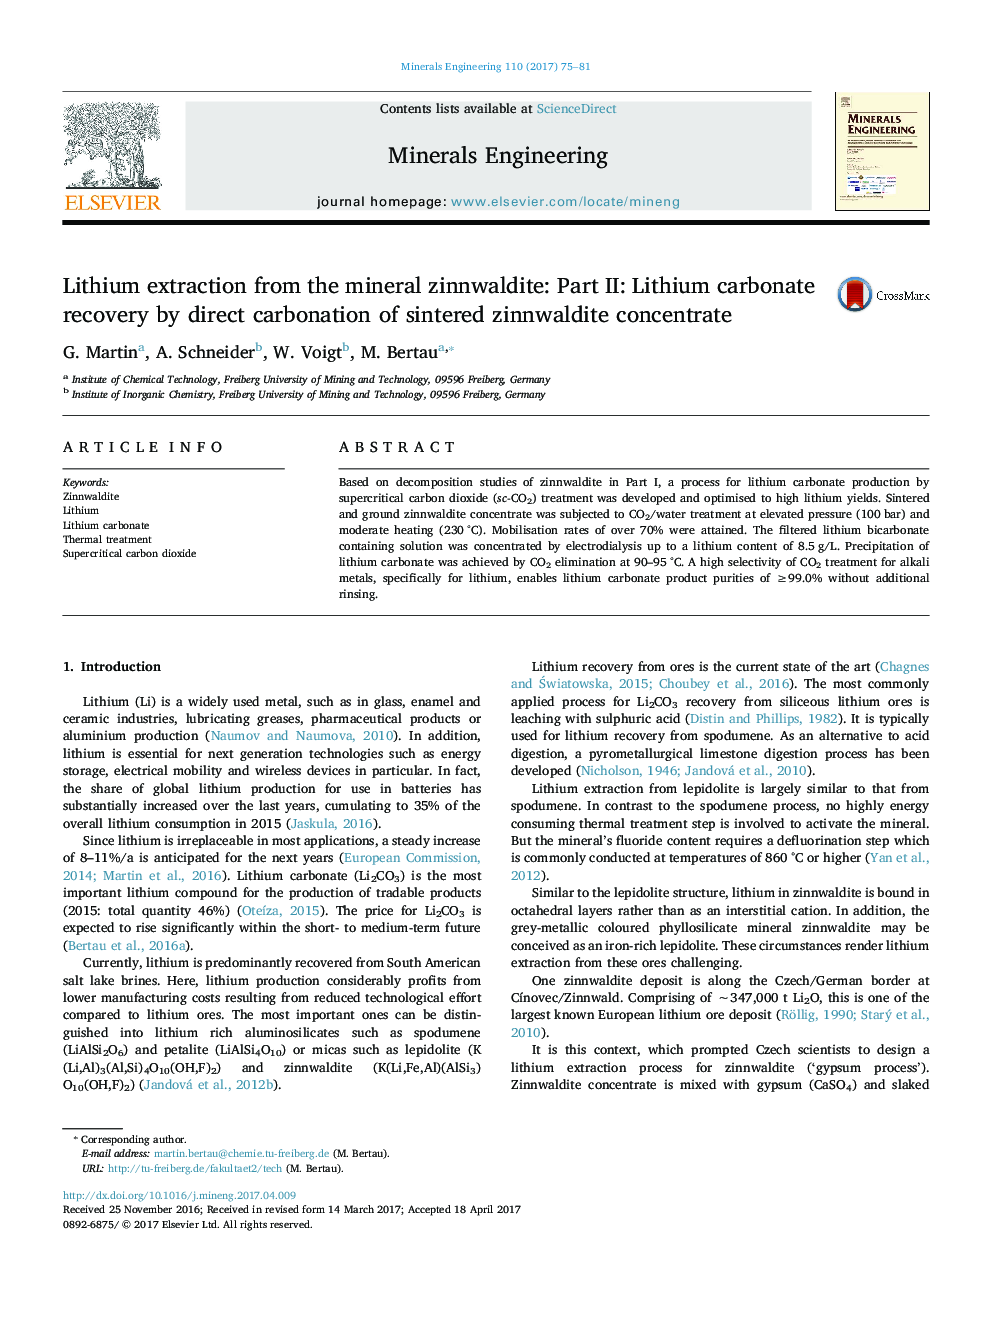 Lithium extraction from the mineral zinnwaldite: Part II: Lithium carbonate recovery by direct carbonation of sintered zinnwaldite concentrate